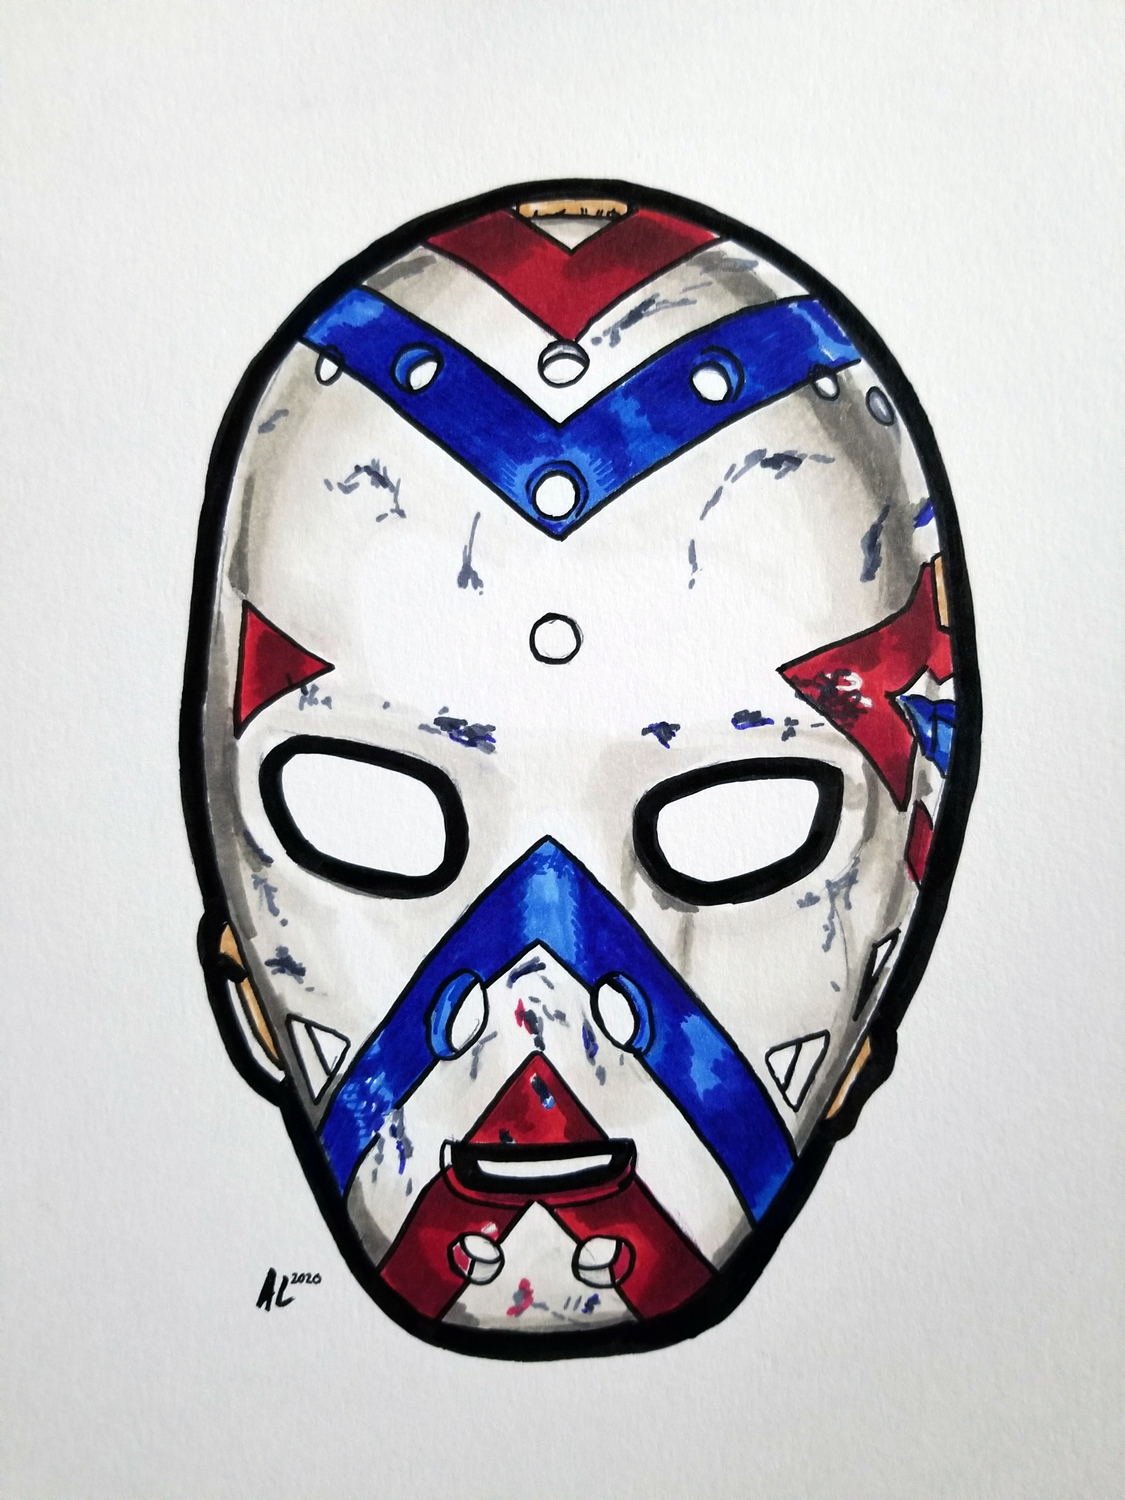 Pen and ink drawing of a goalie mask without cage and red and blue linear arrow design.